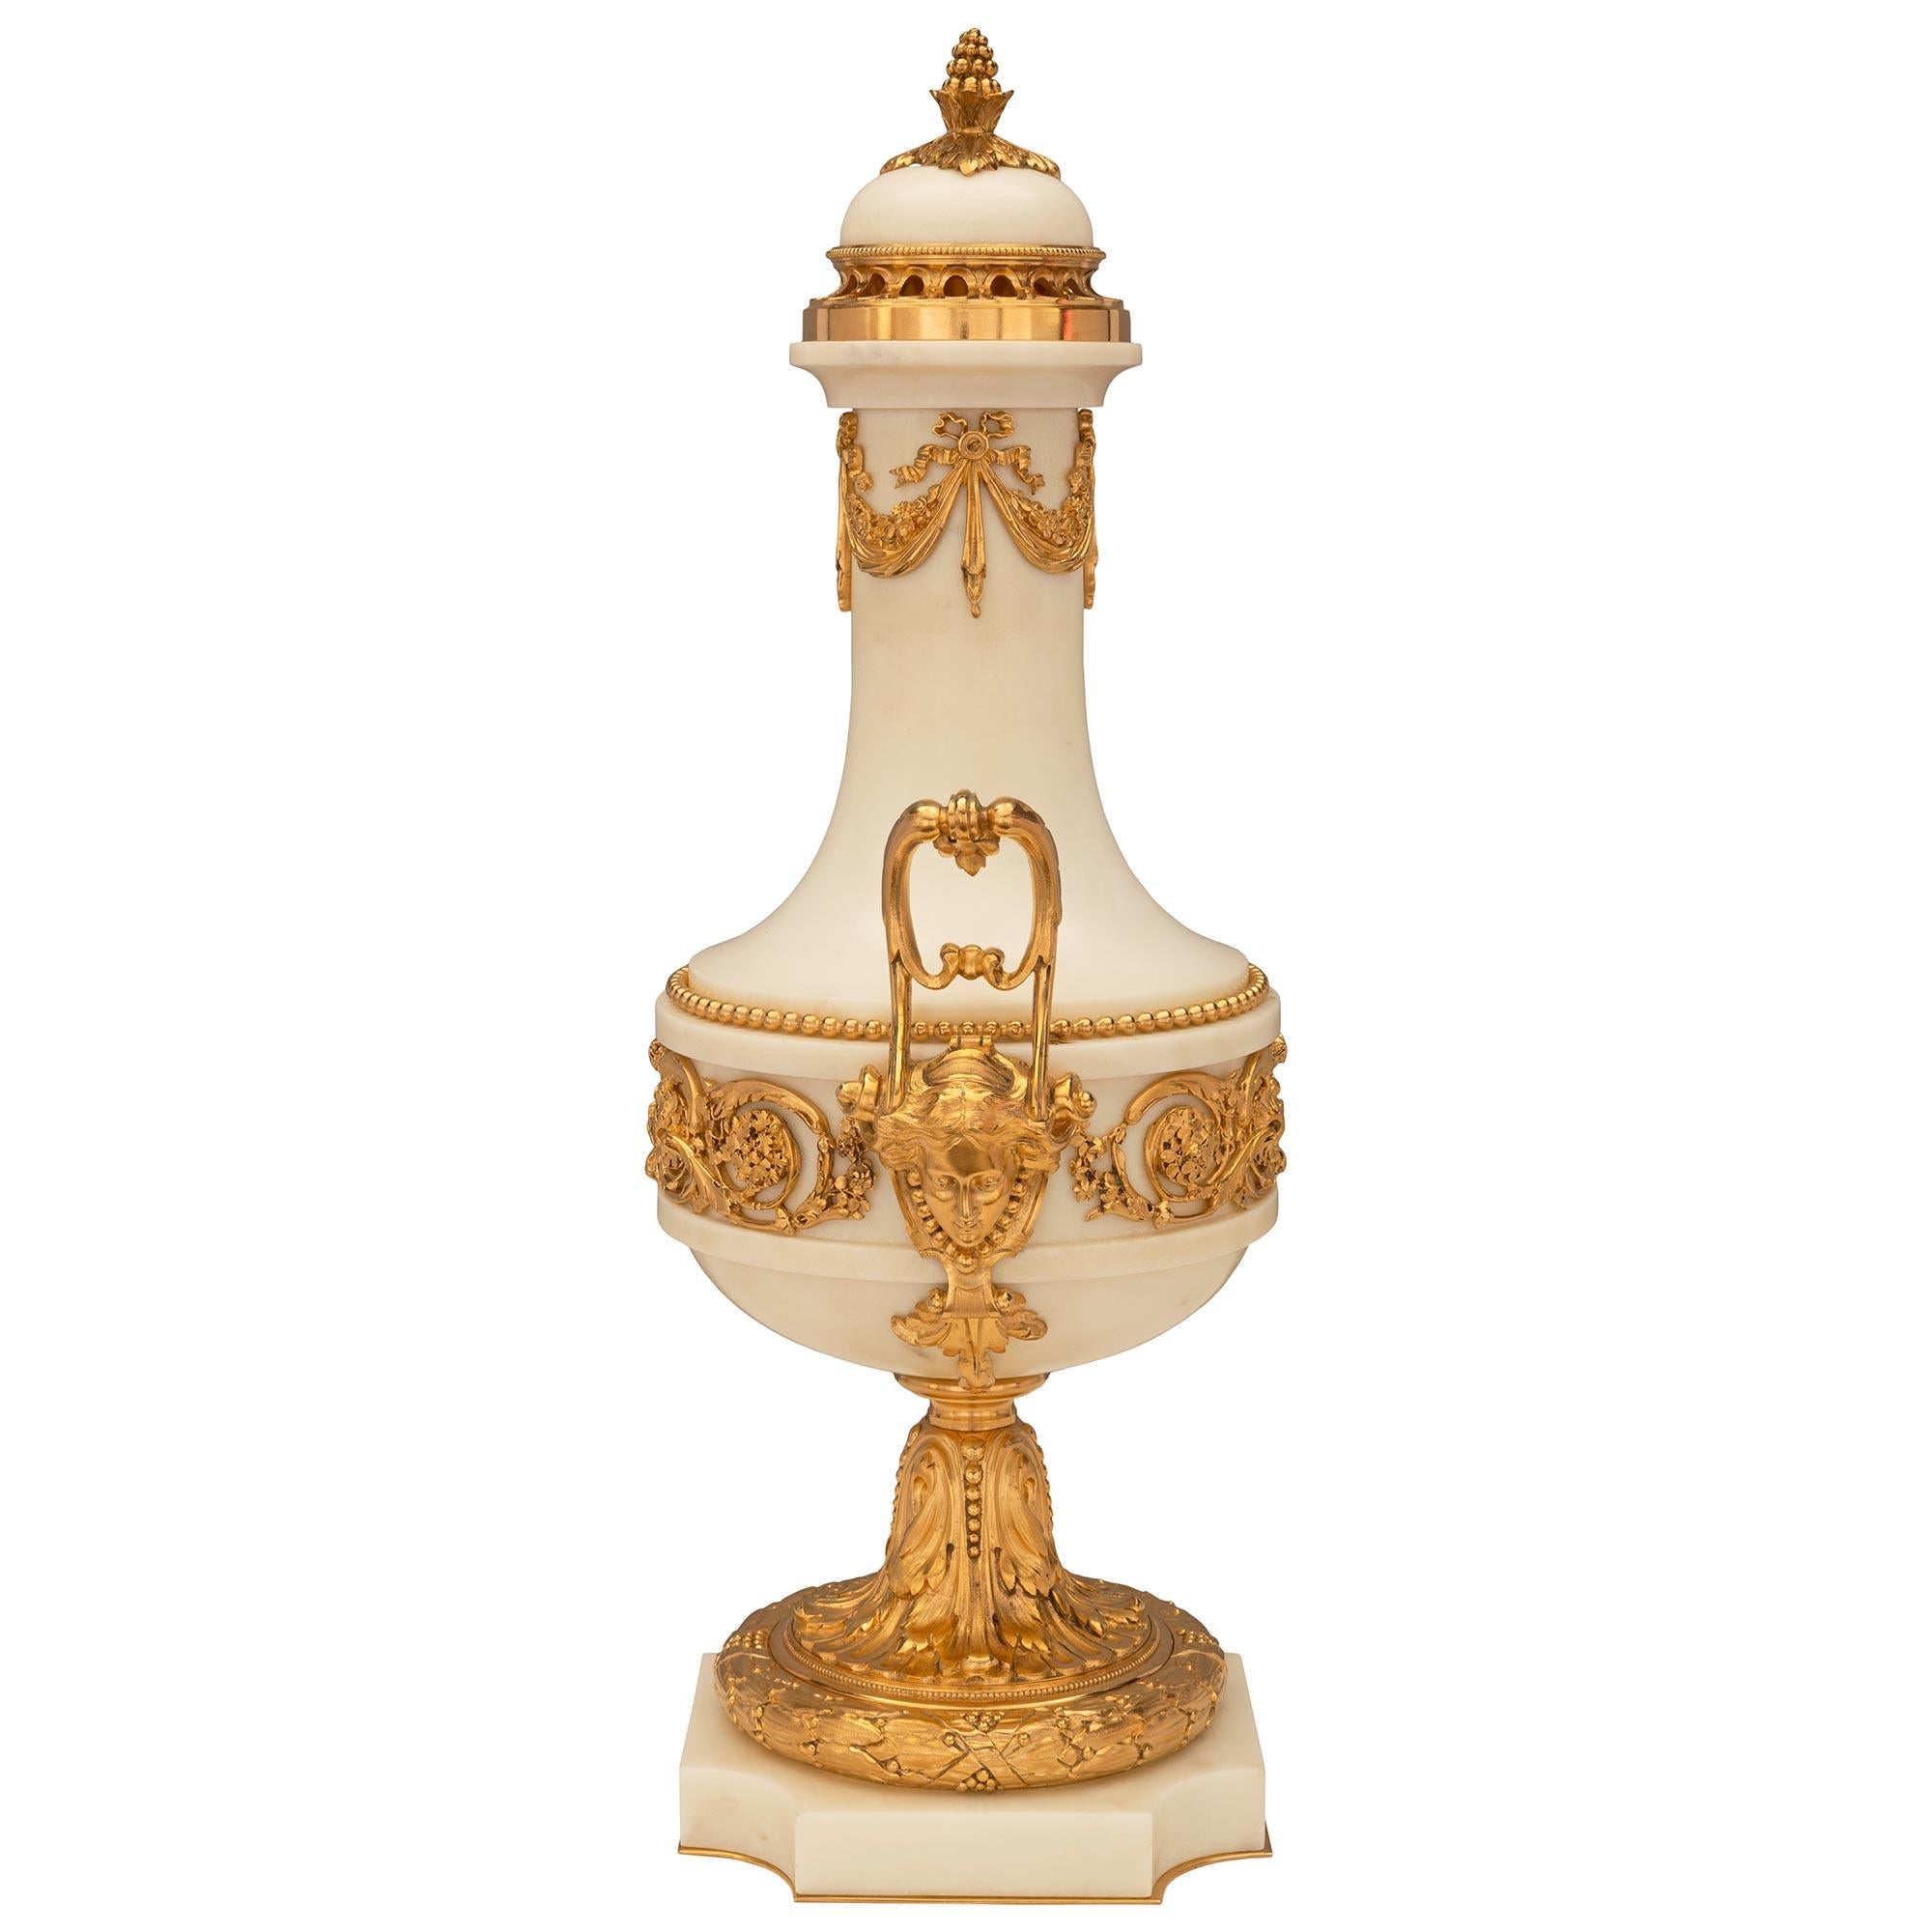 Pair Of French 19th Century Belle Époque Period Marble And Ormolu Lidded Urns In Good Condition For Sale In West Palm Beach, FL